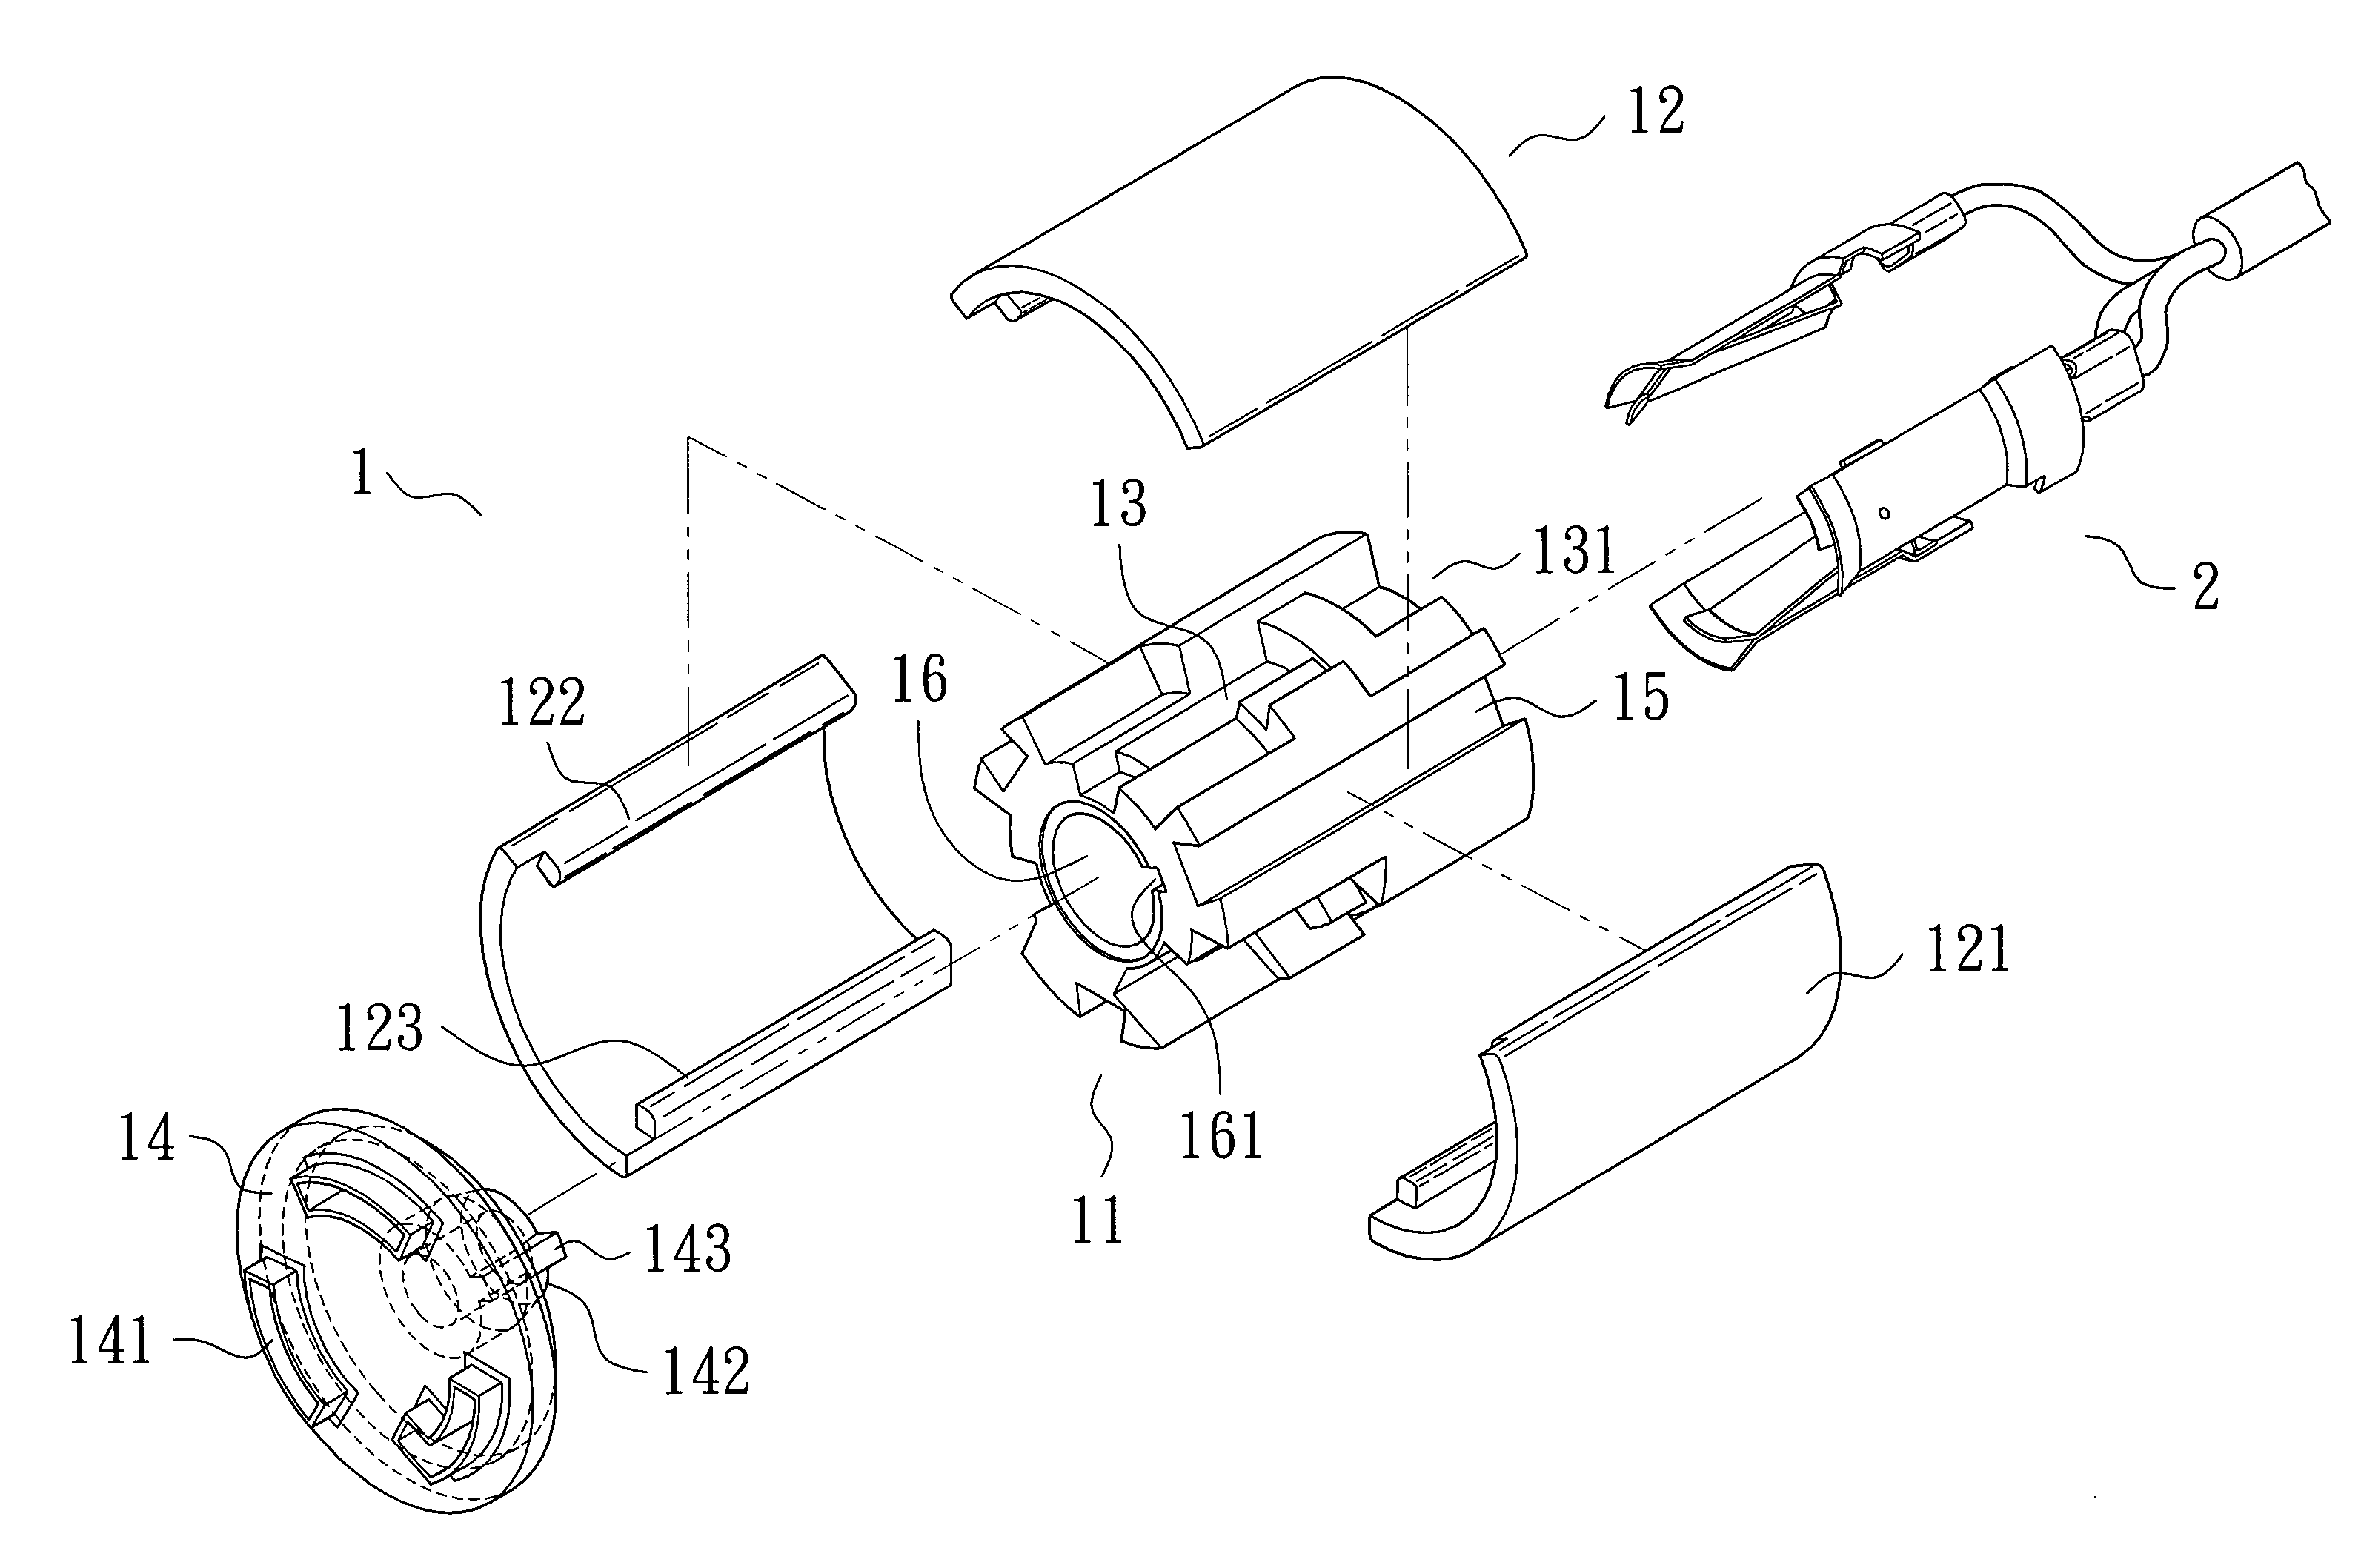 Assembly-type female connector